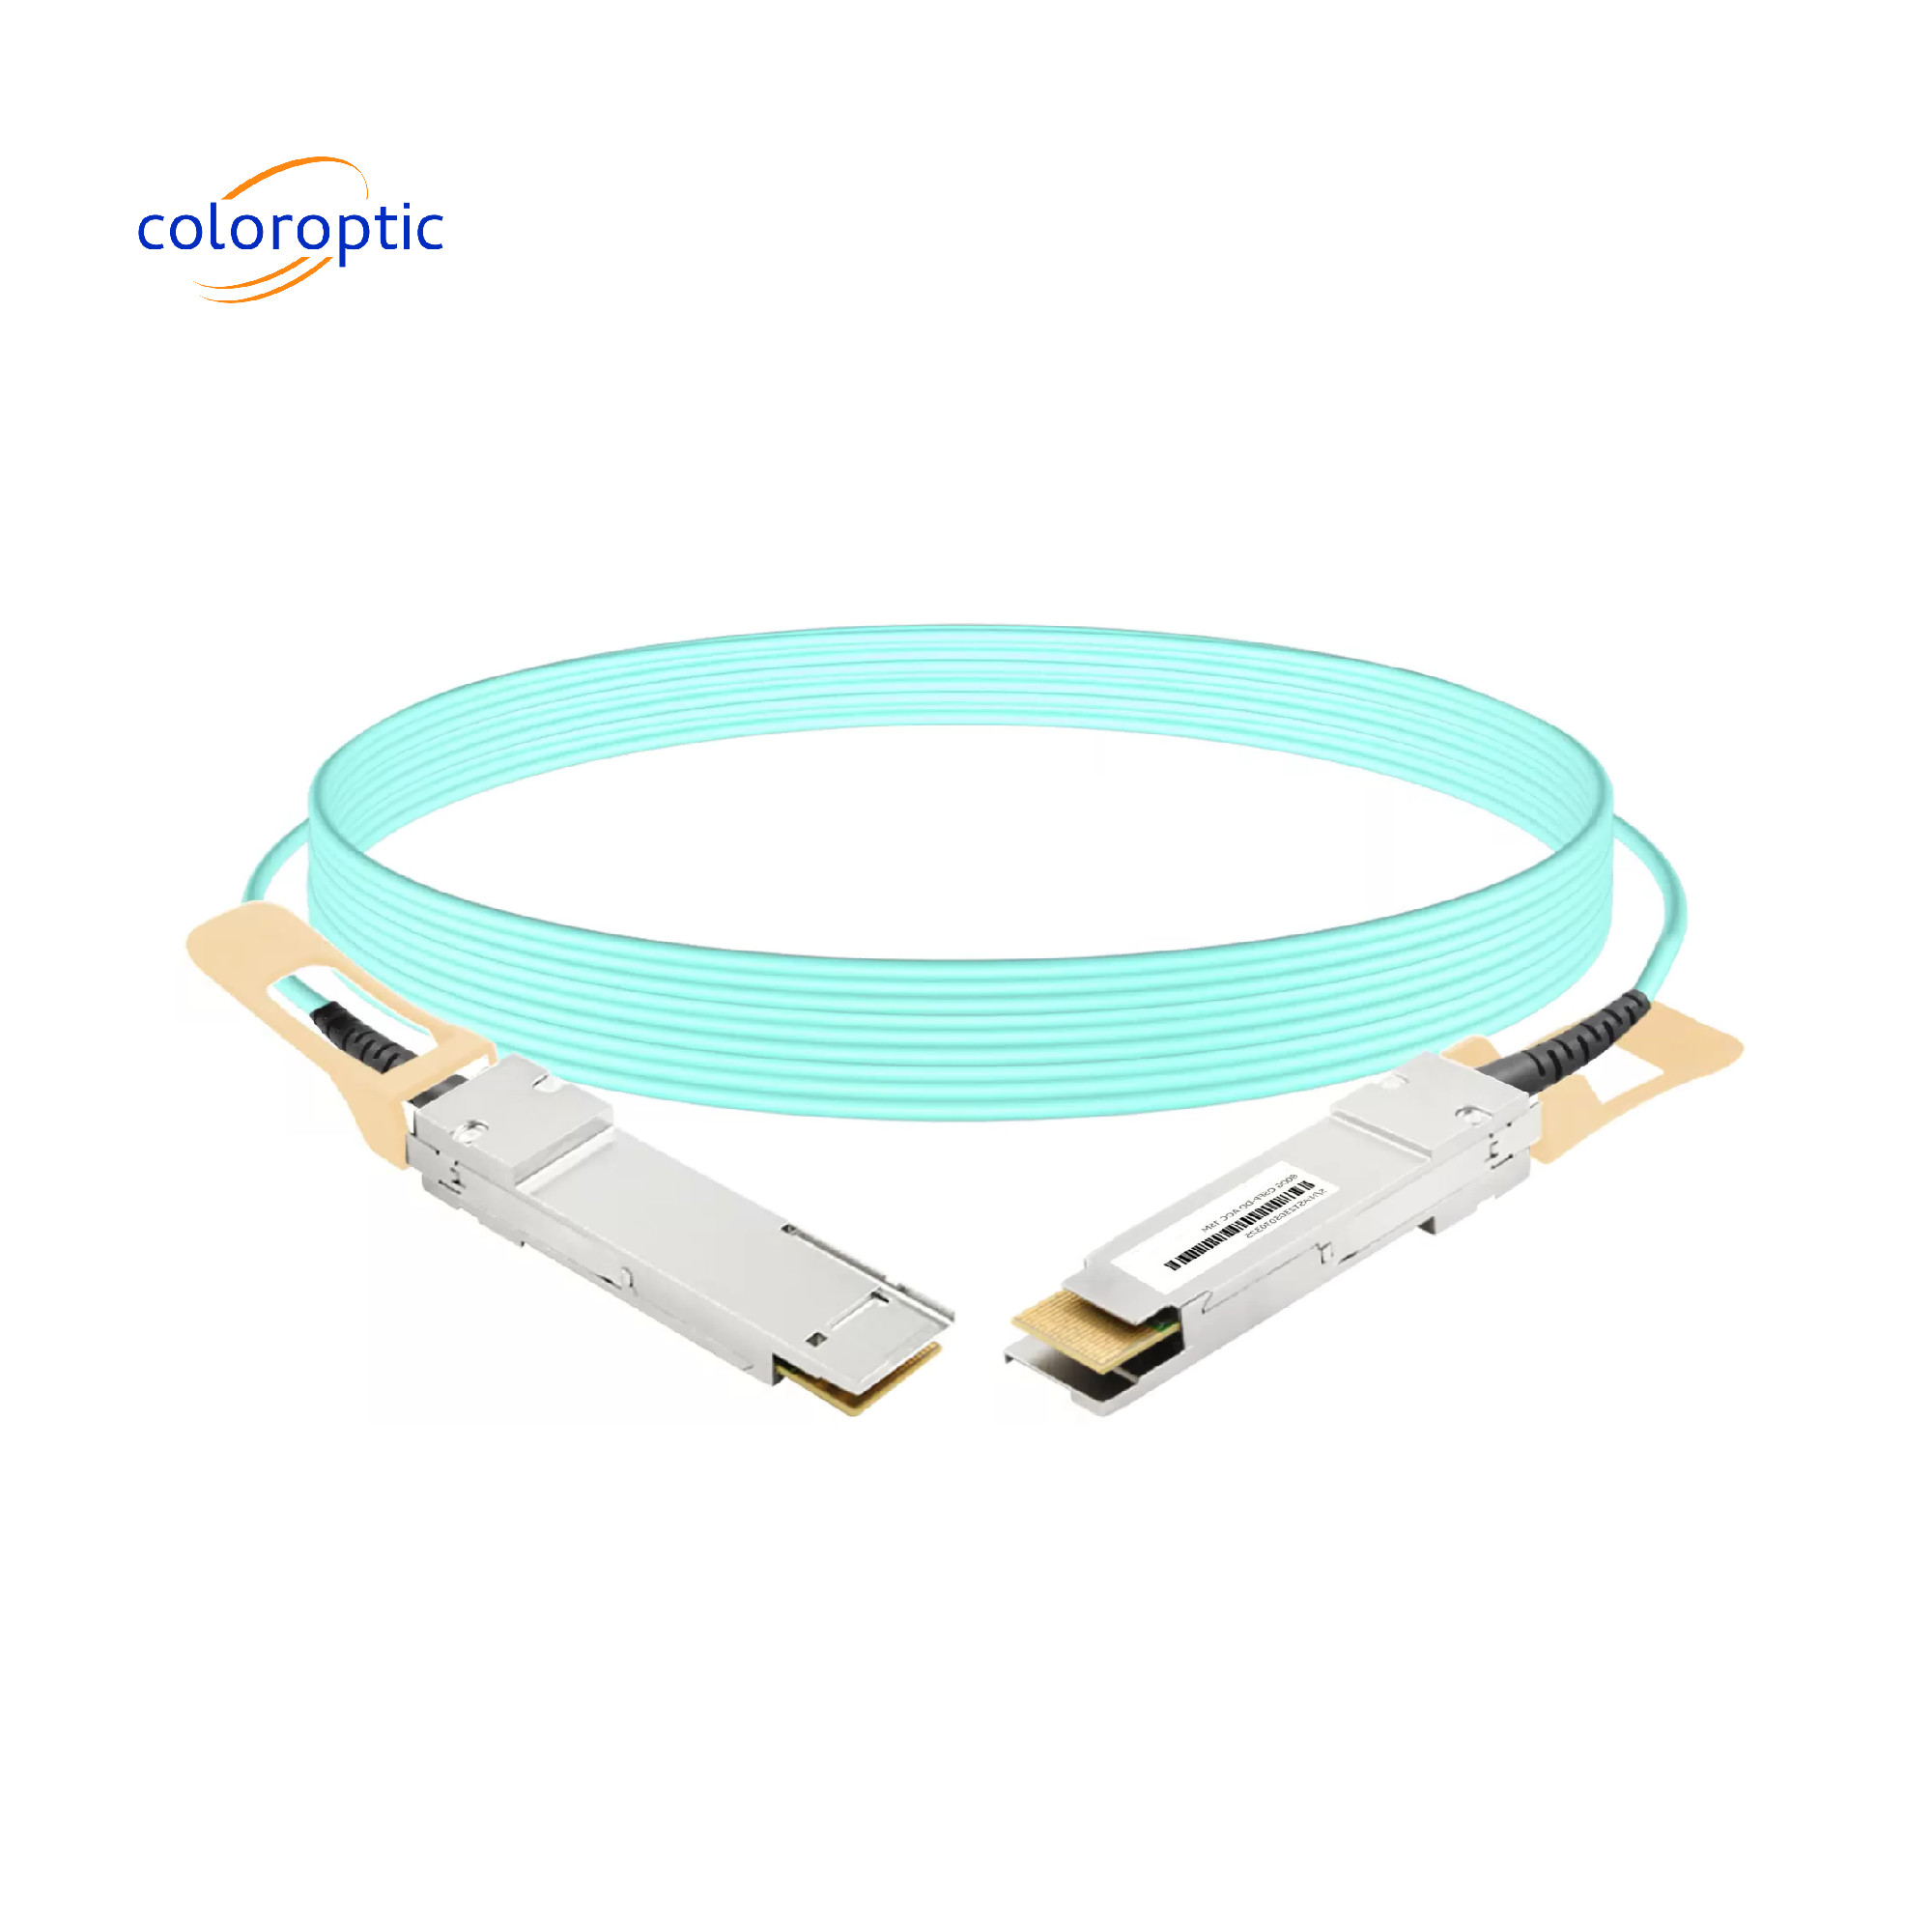 China QSFP28 100G AOC for Arista 100G Switch and Router Ports Lower power, low error bit rate. High bend radius factory